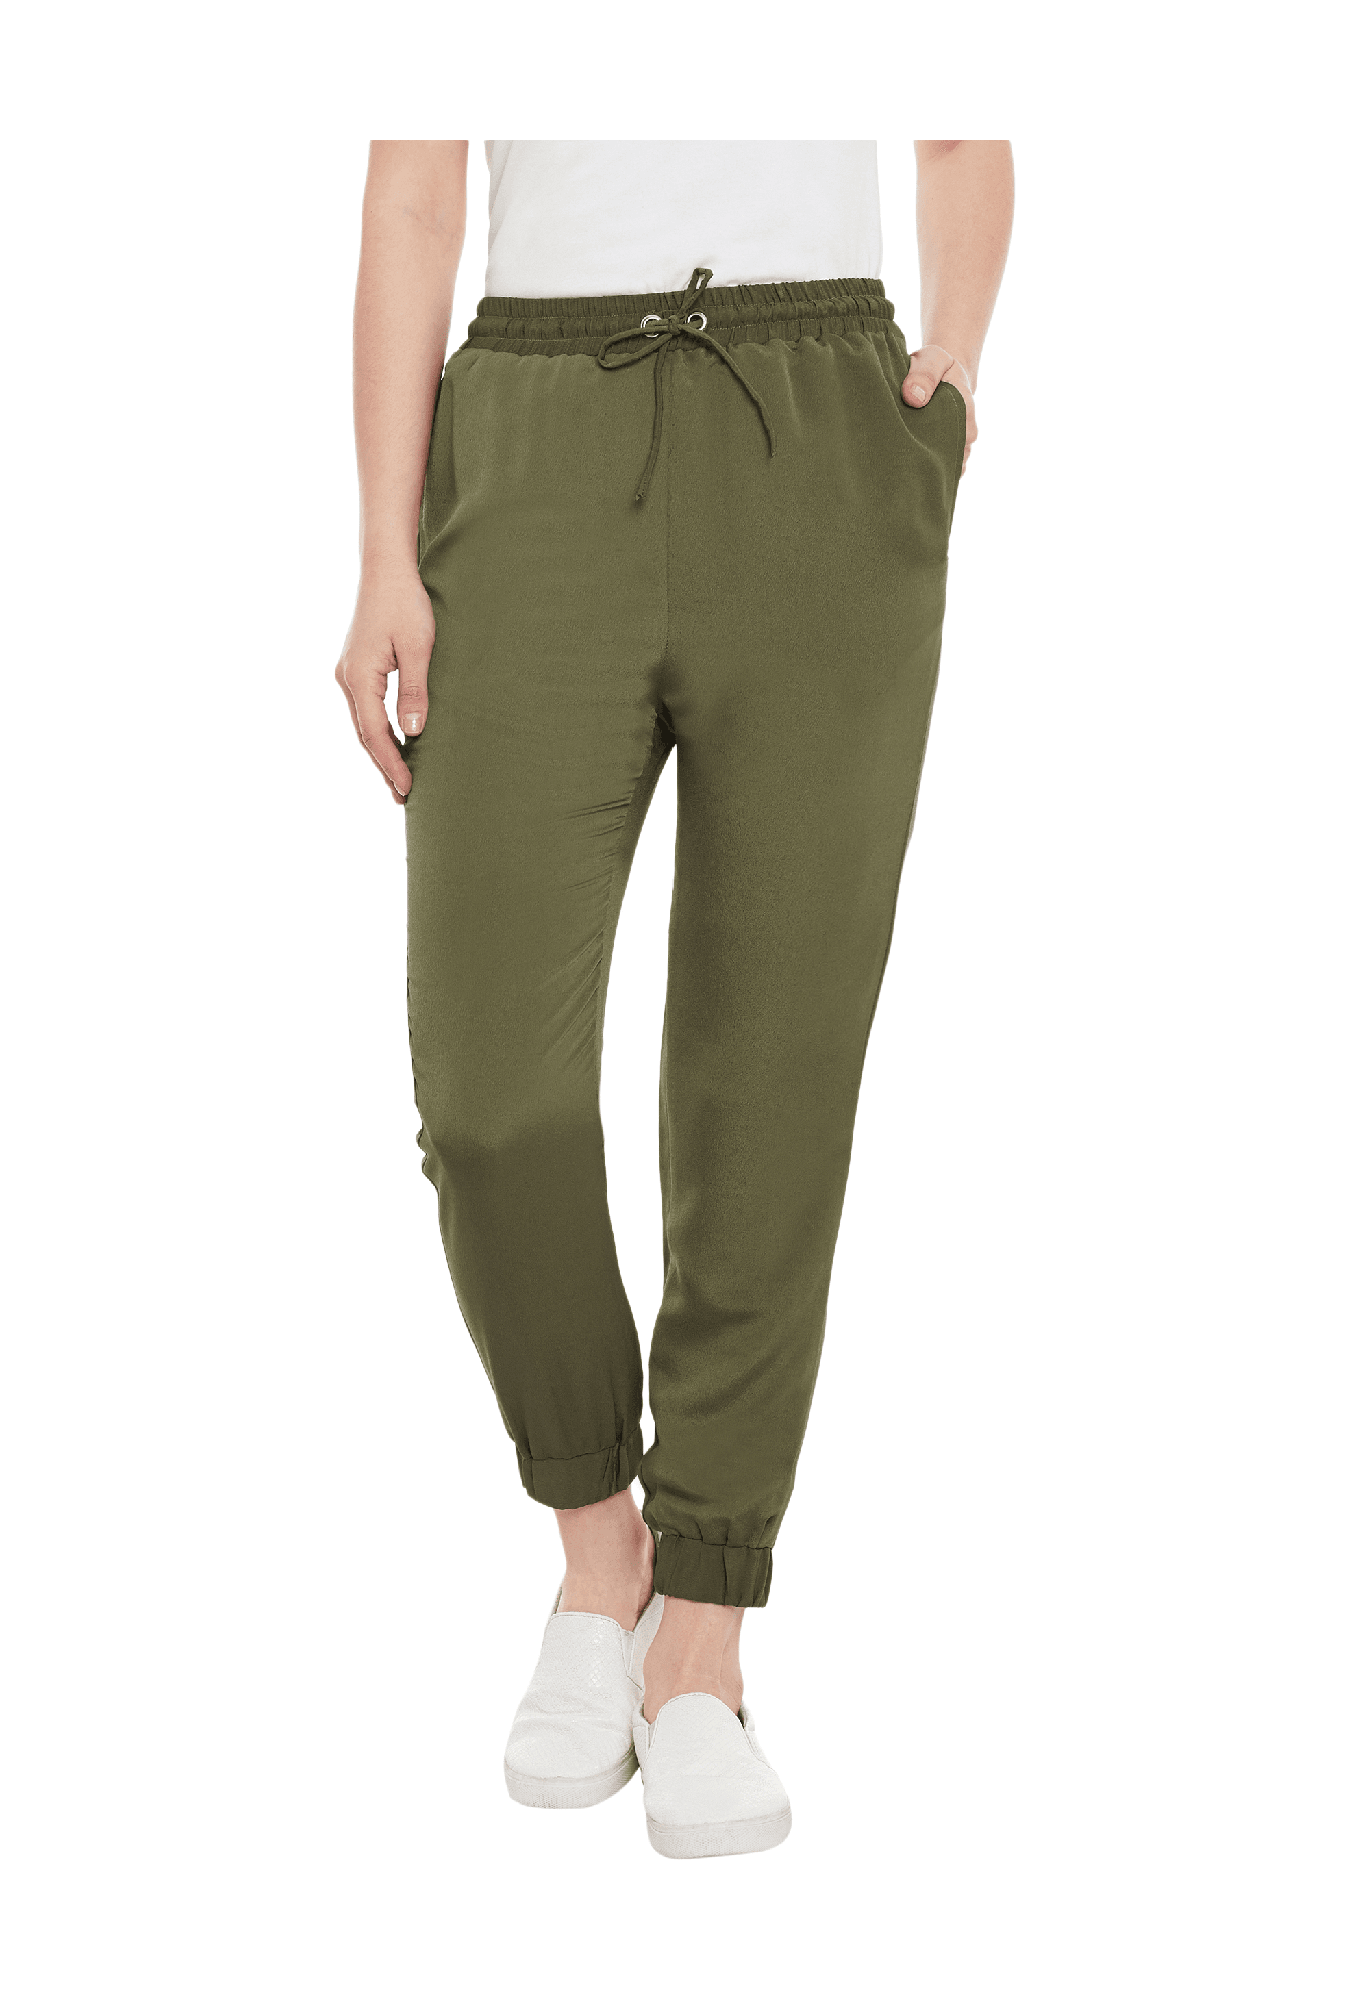 Buy Miss Chase Olive Relaxed Fit Joggers for Women Online @ Tata CLiQ